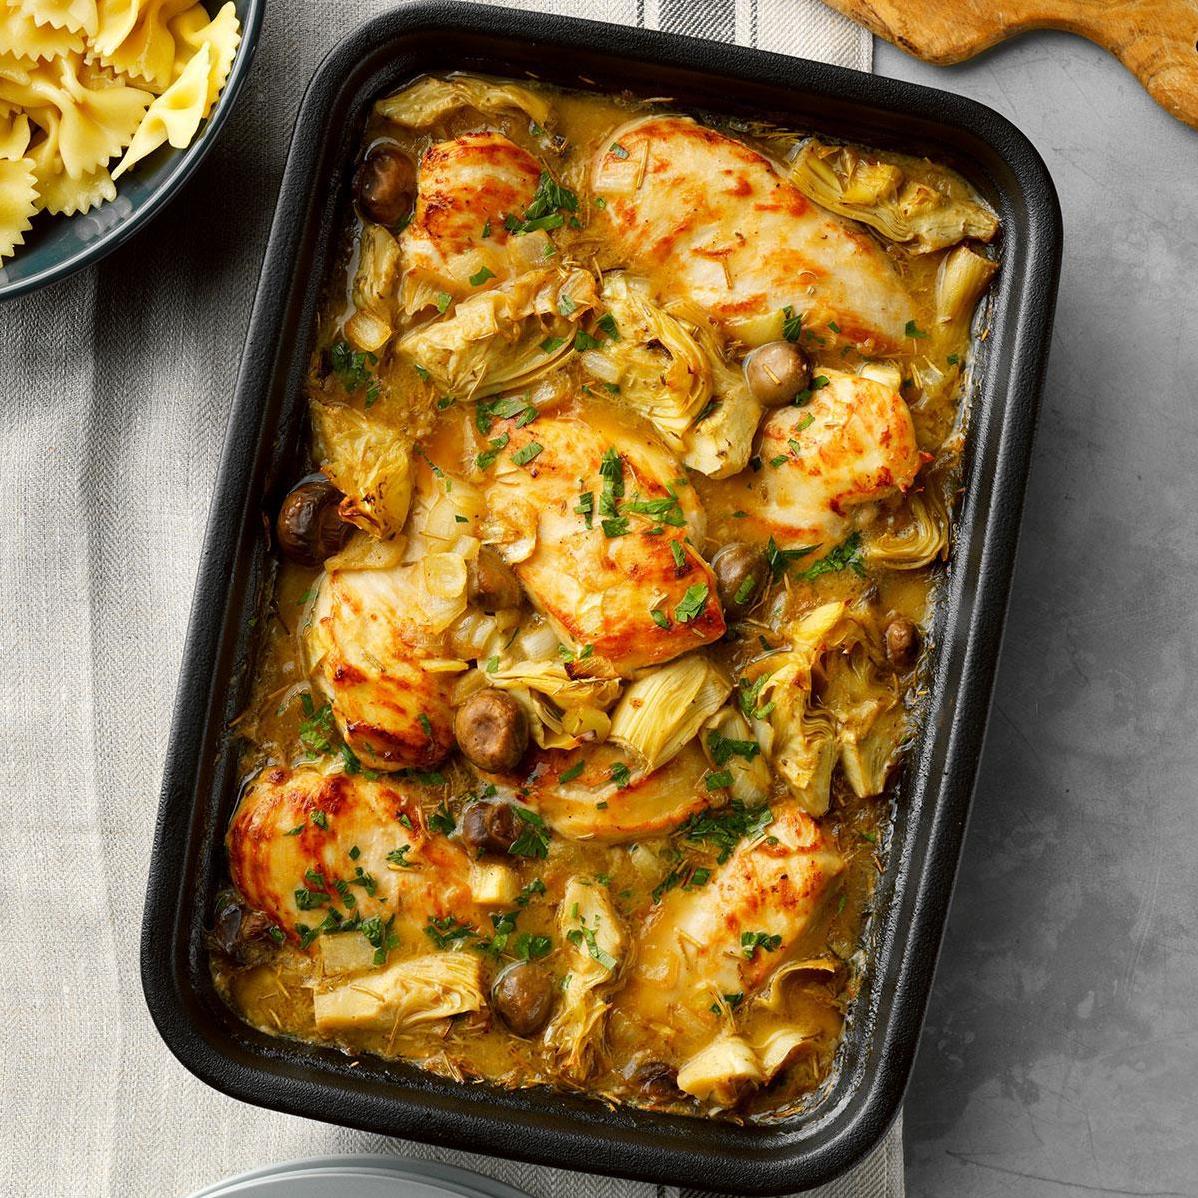  A perfect balance of tender chicken, fresh artichokes, and delicious spices